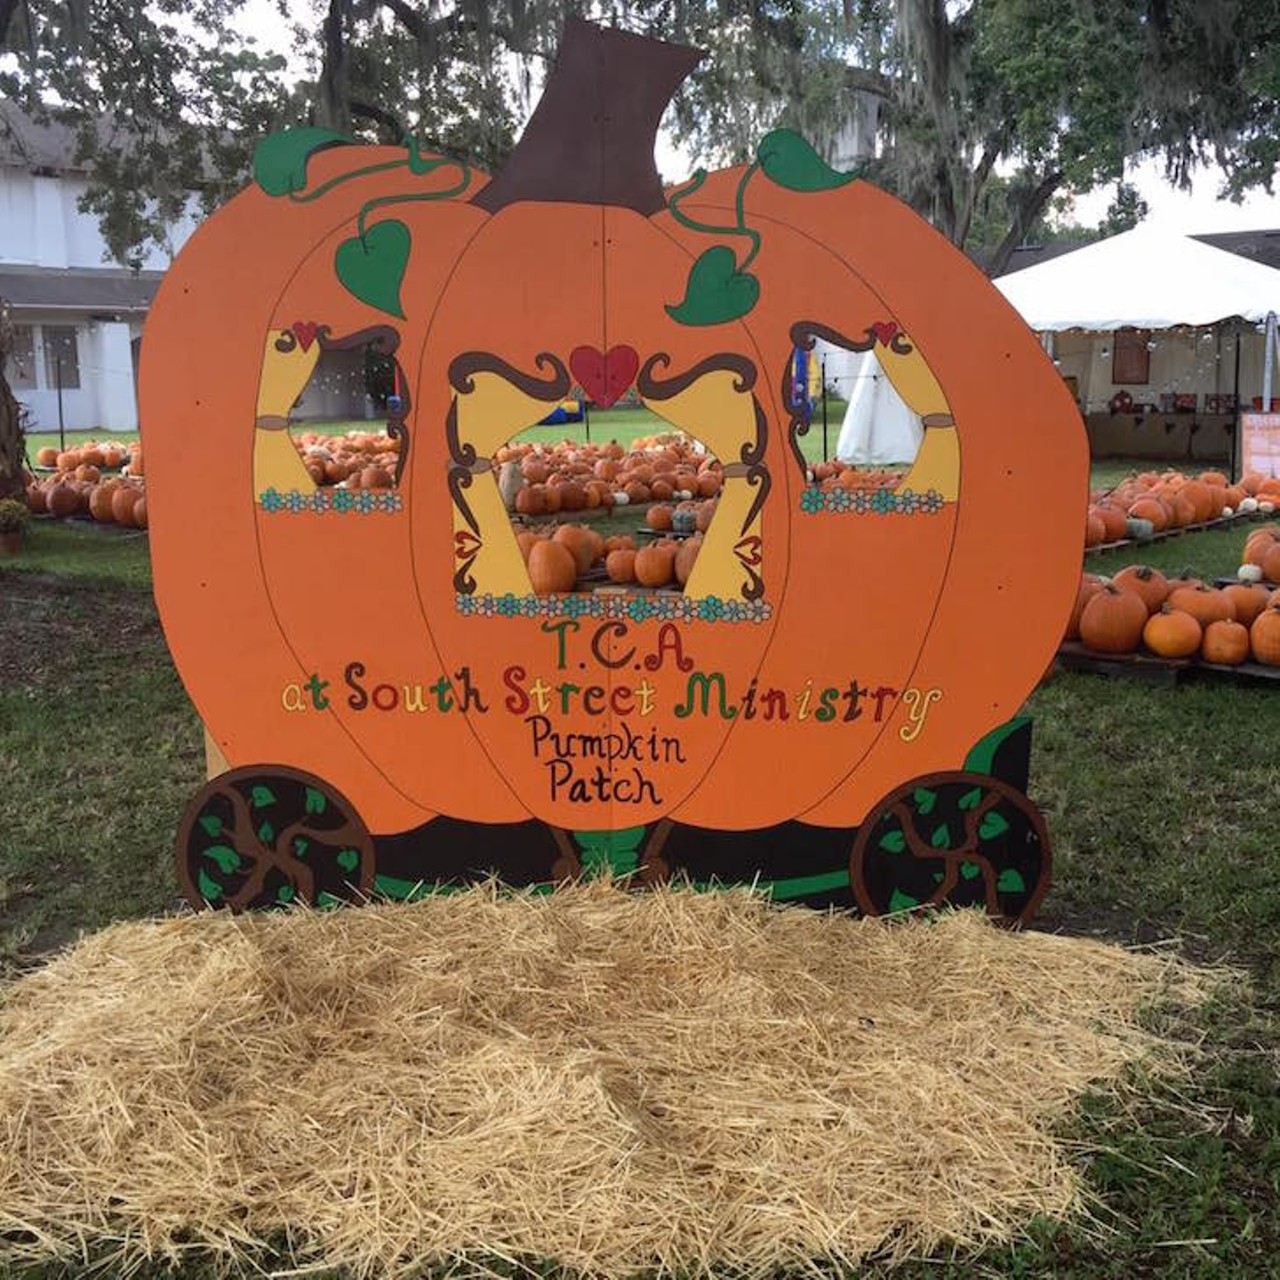 Trinity Christian Academy Orlando Pumpkin Patch
2113 E. South St., 407-894-2237 
From Oct. 15-30 you can get your pick of pumpkins at Trinity Christian Academy in Orlando. You can also partake in fall games, activities and food at the Fall Festival event on Oct. 20 at 6 p.m. 
Photo via Trinity Christian Academy Orlando/Facebook